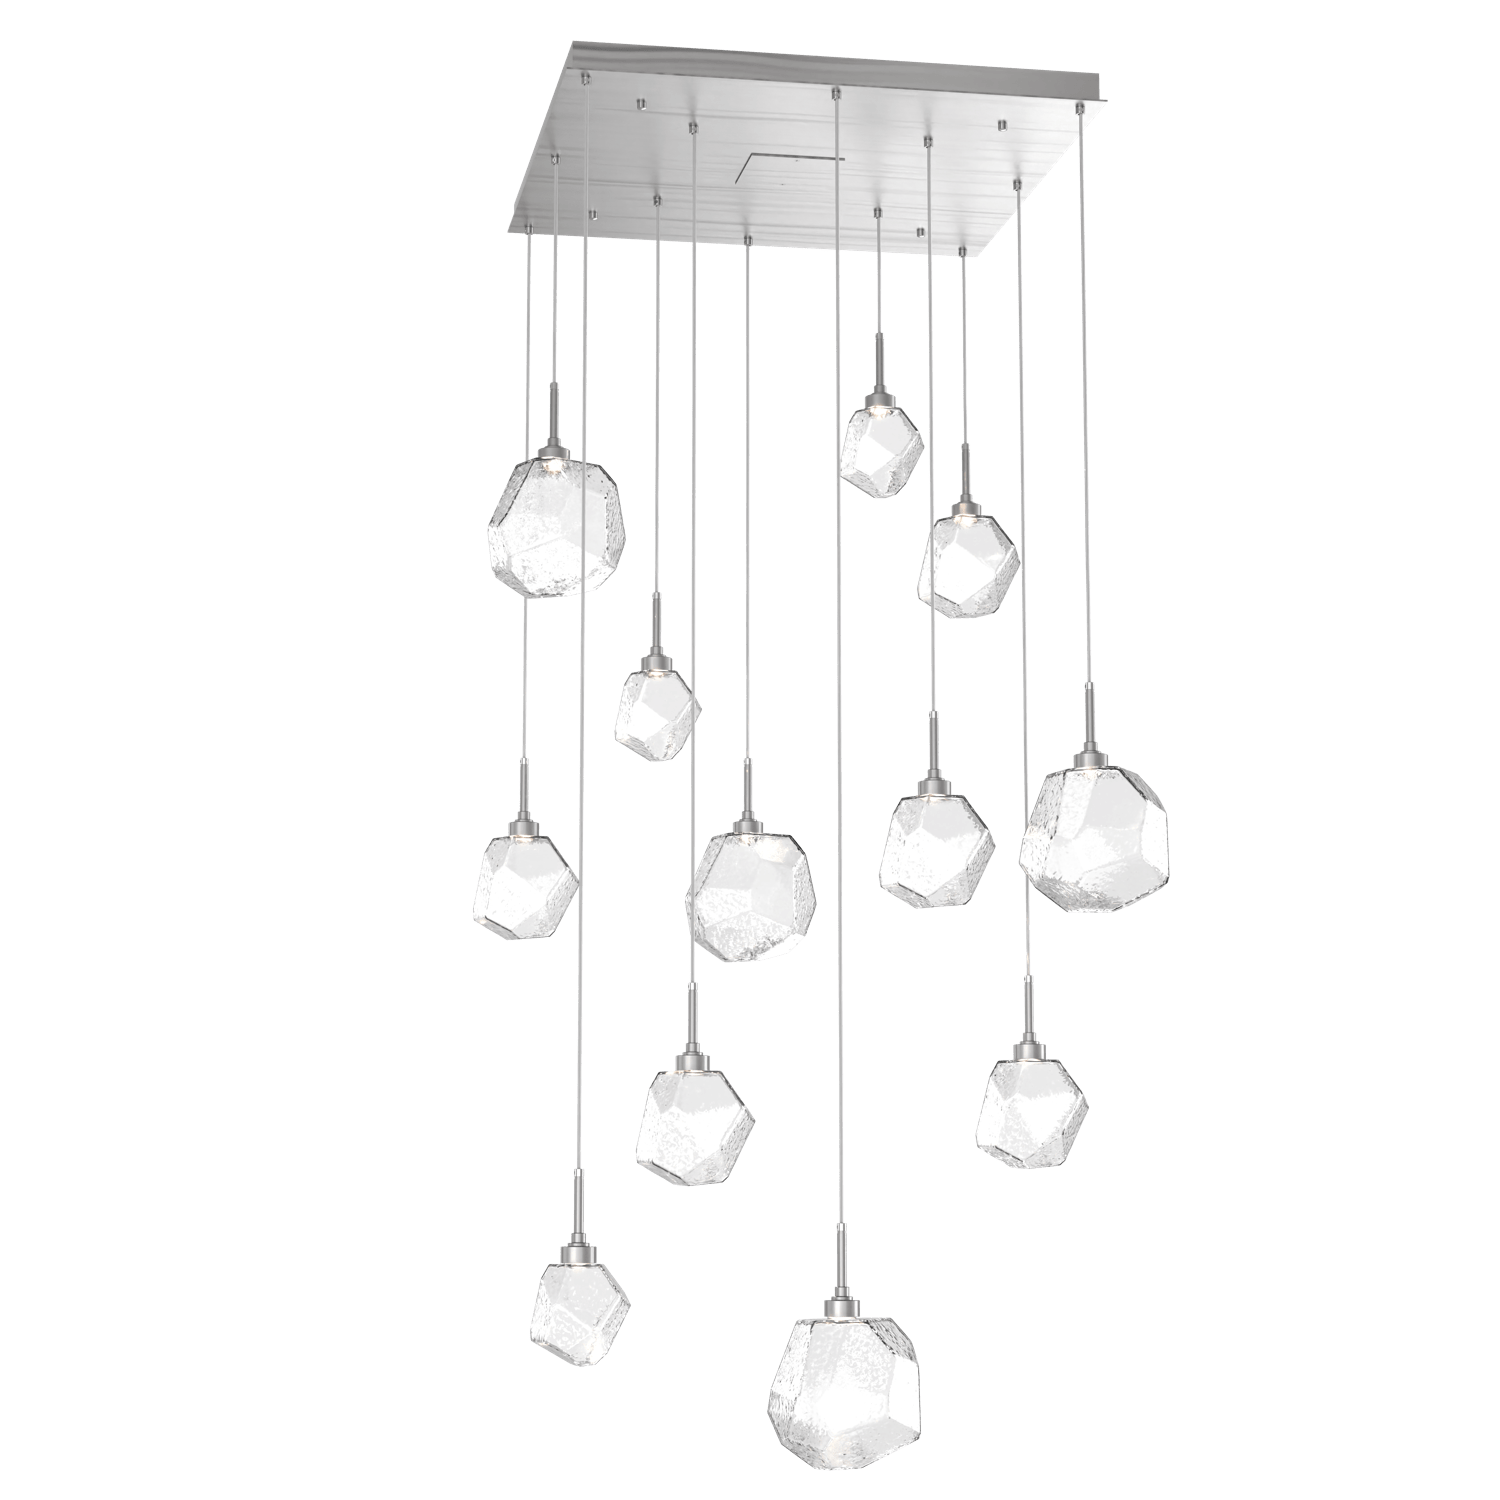 CHB0039-12-SN-C-Hammerton-Studio-Gem-12-light-square-pendant-chandelier-with-satin-nickel-finish-and-clear-blown-glass-shades-and-LED-lamping